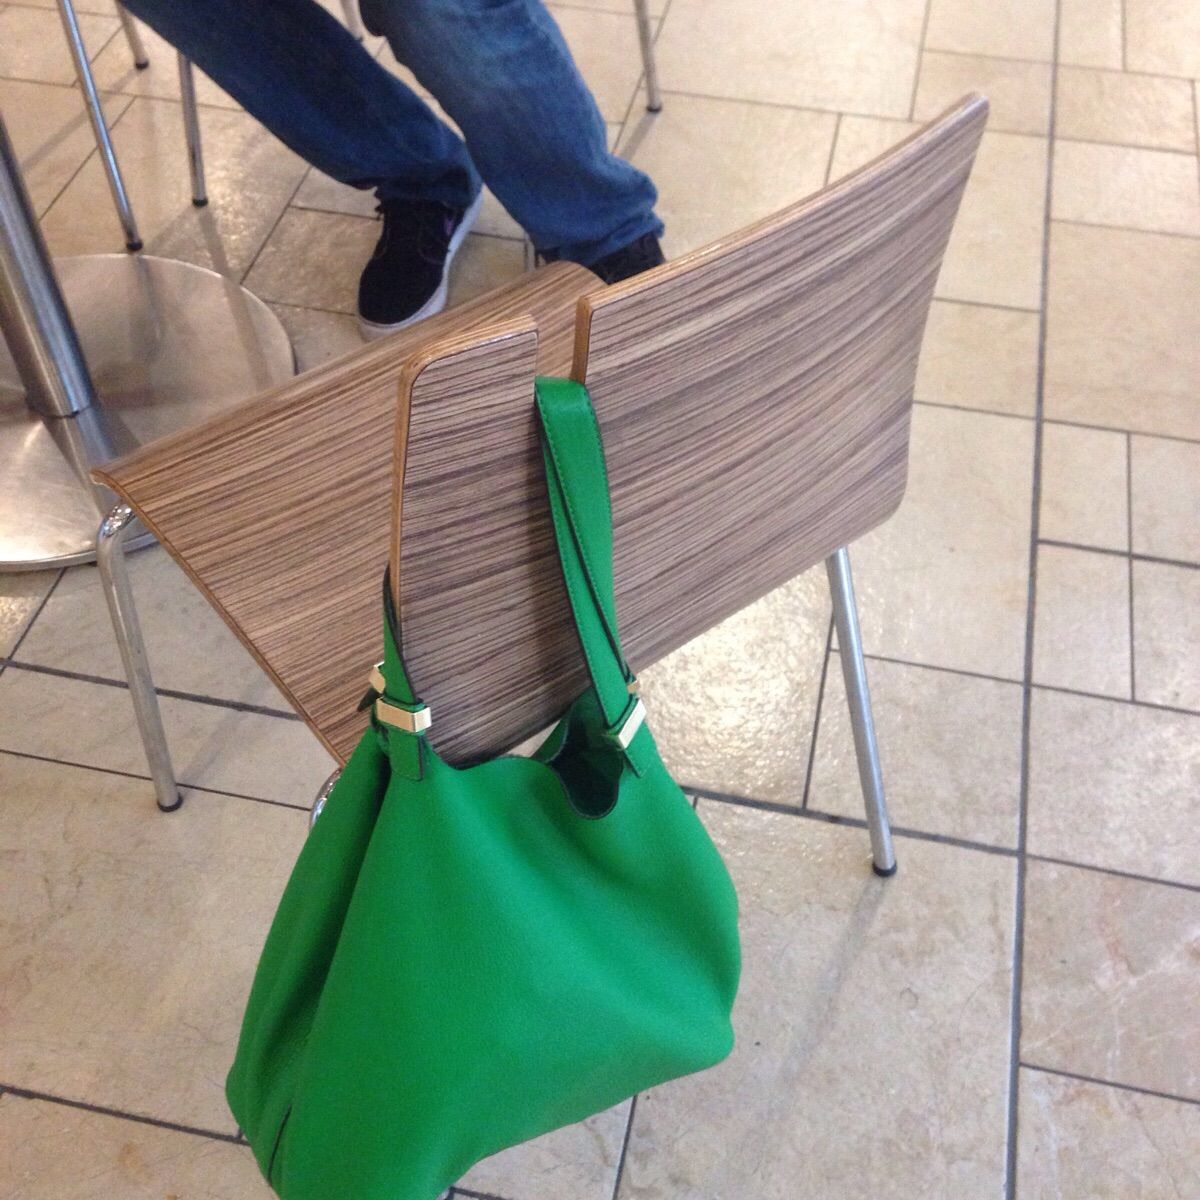 Chair With Slot To Hold Bags